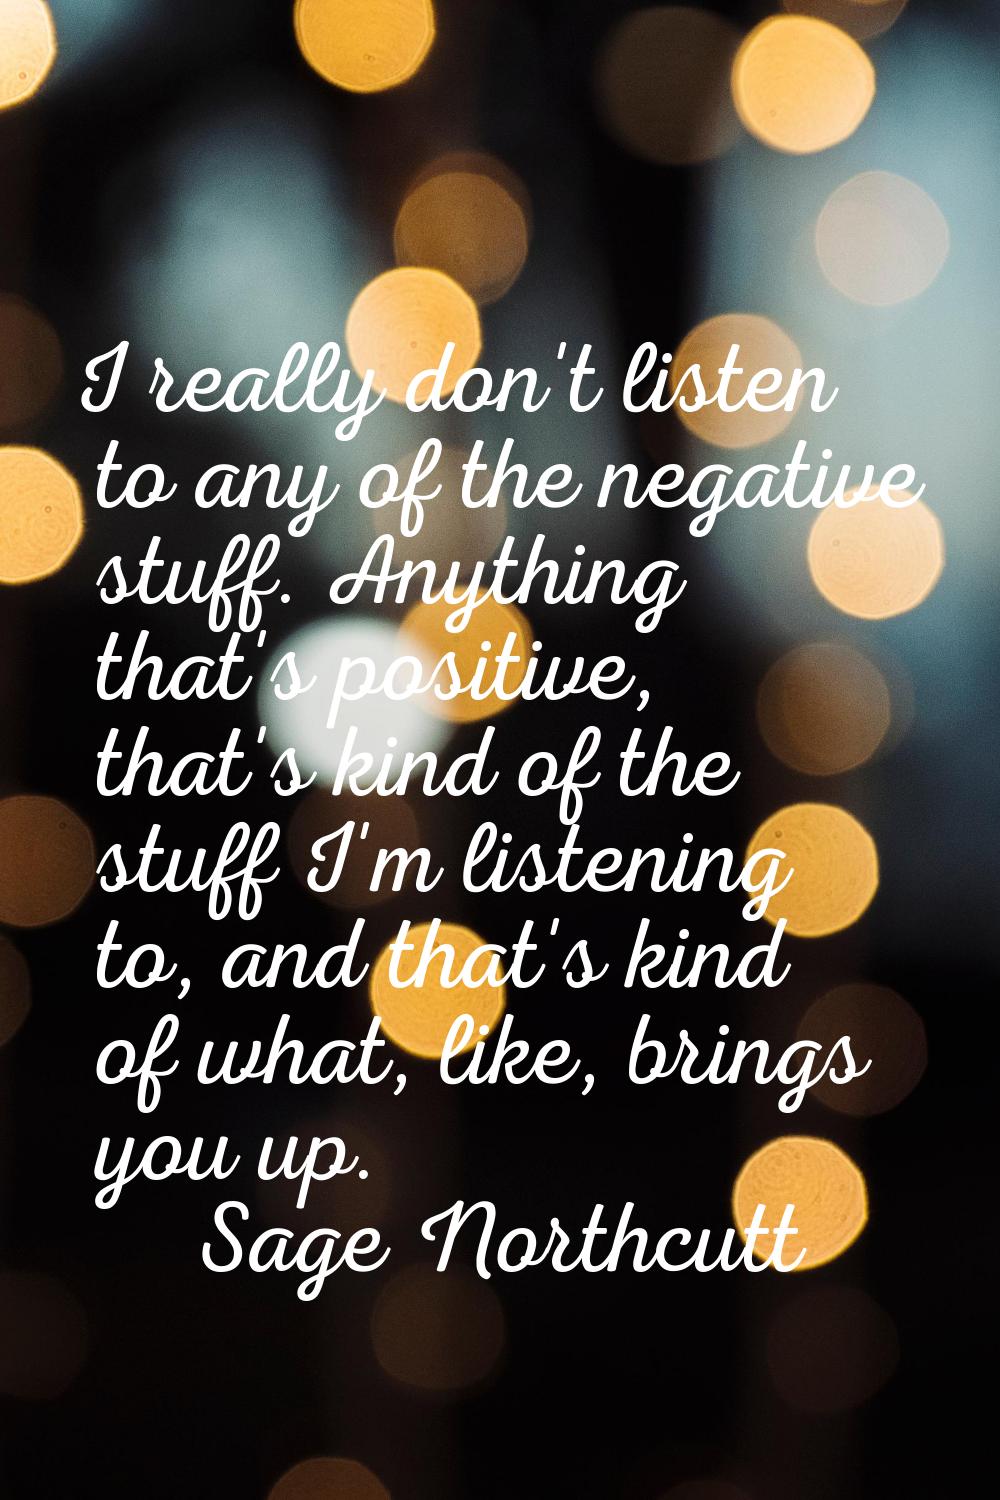 I really don't listen to any of the negative stuff. Anything that's positive, that's kind of the st